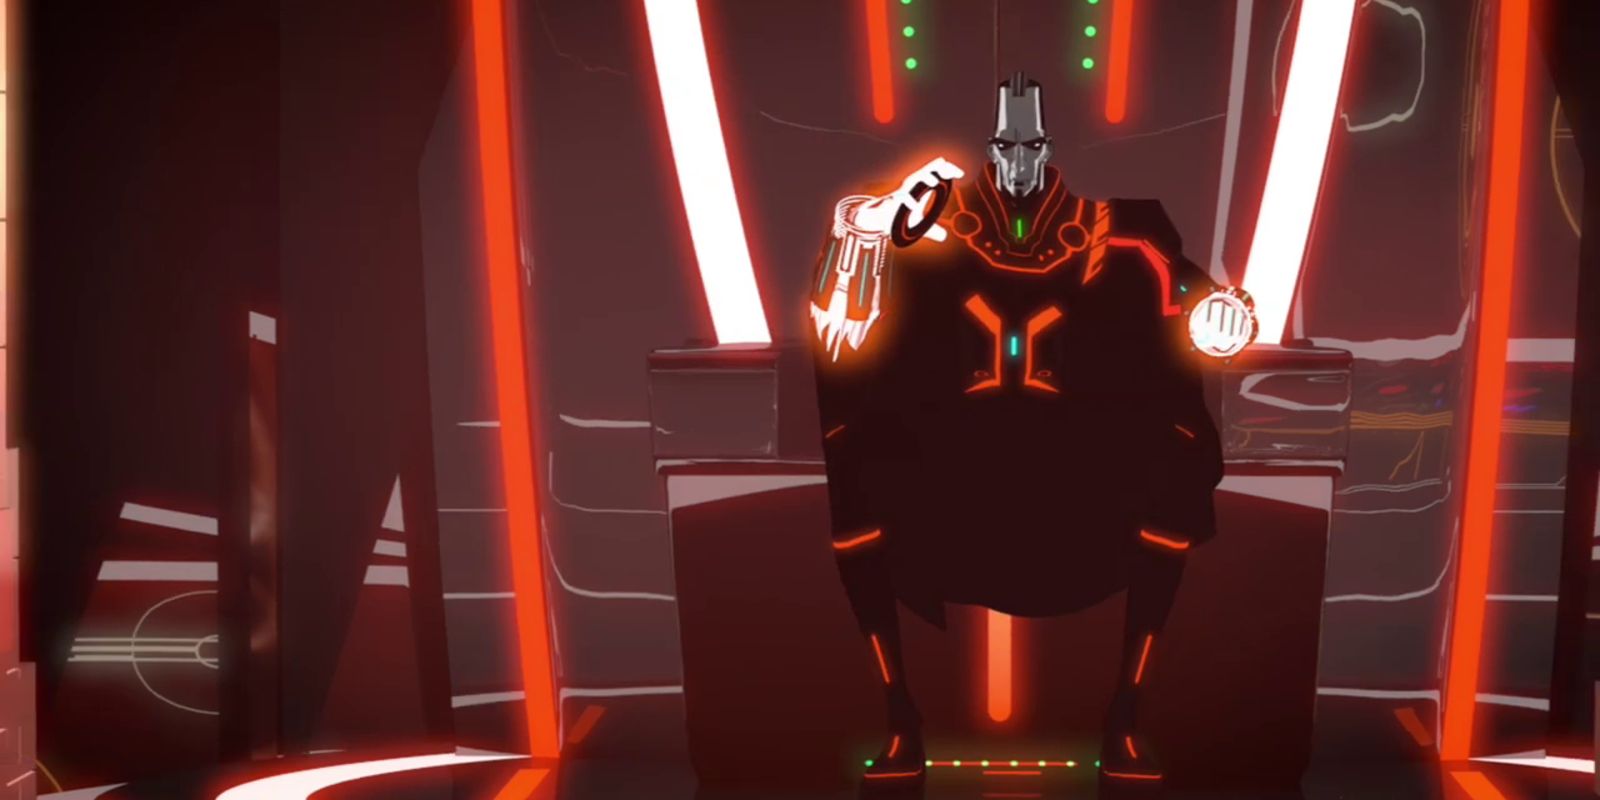 General Tesler on his throne in Tron Uprising